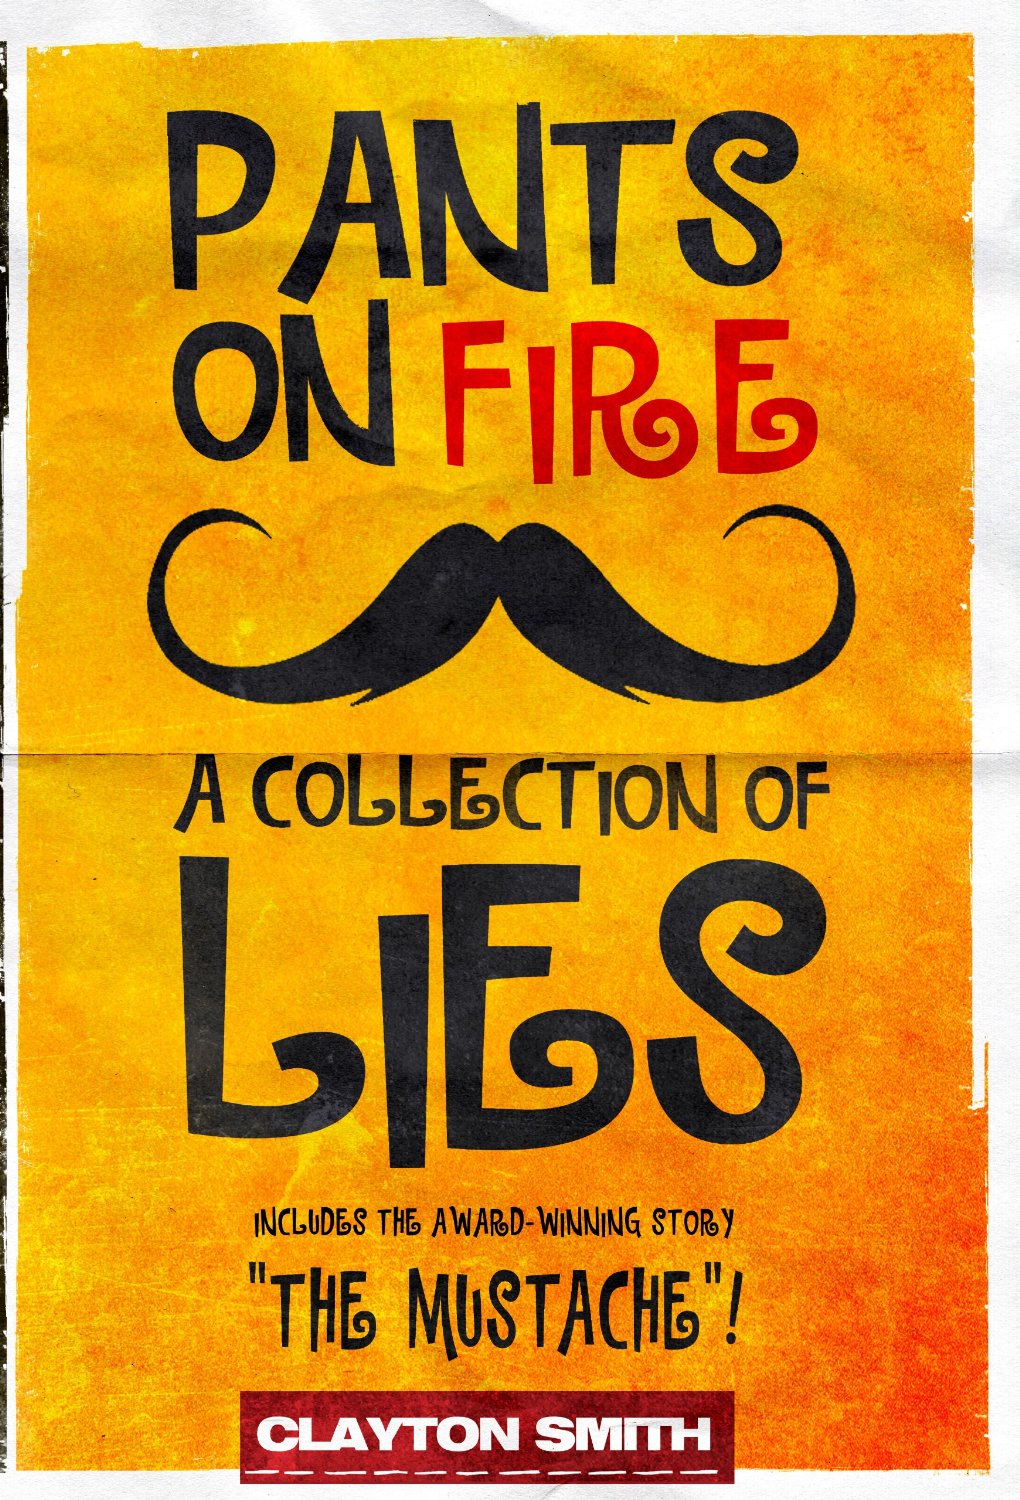 Pants on Fire: A Collection of Lies by Clayton Smith